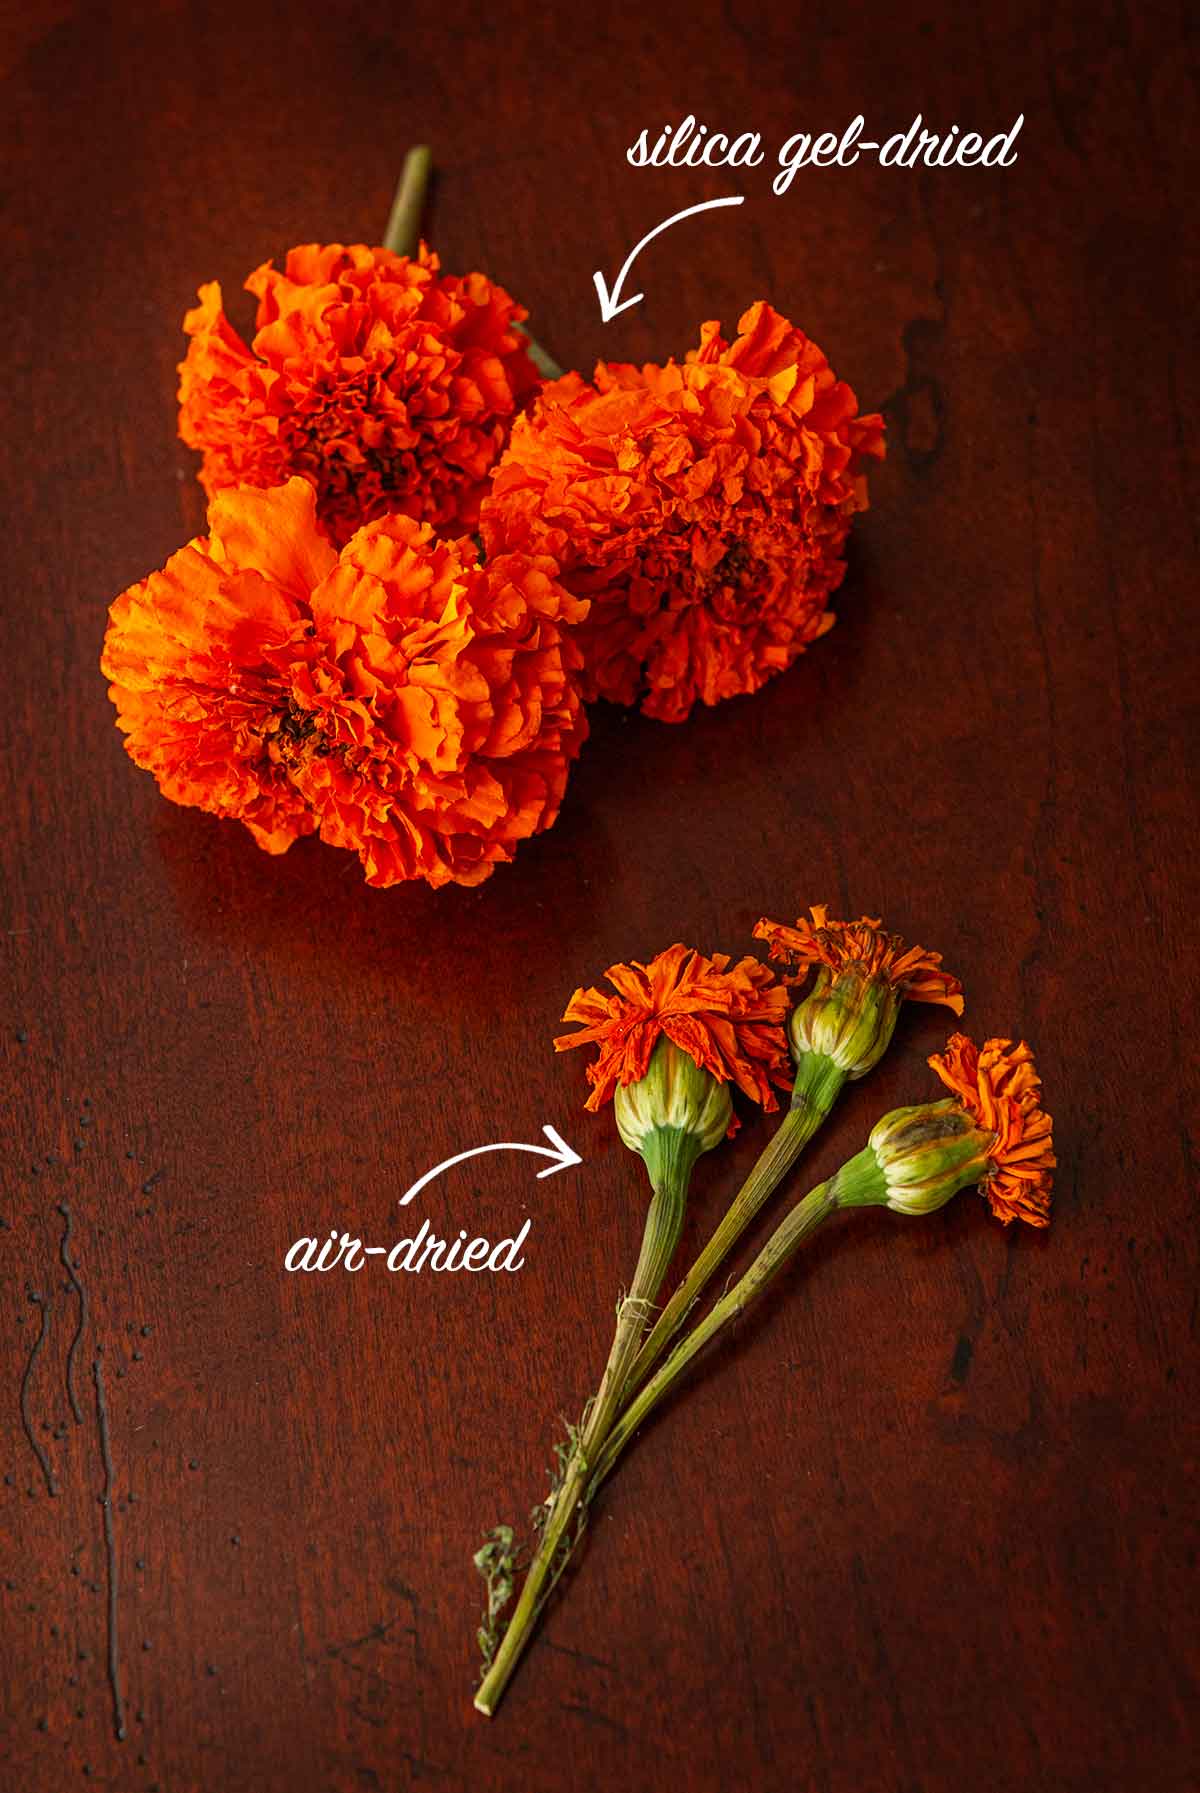 3 silica-dried marigolds and 3 air-dried marigolds on a table.